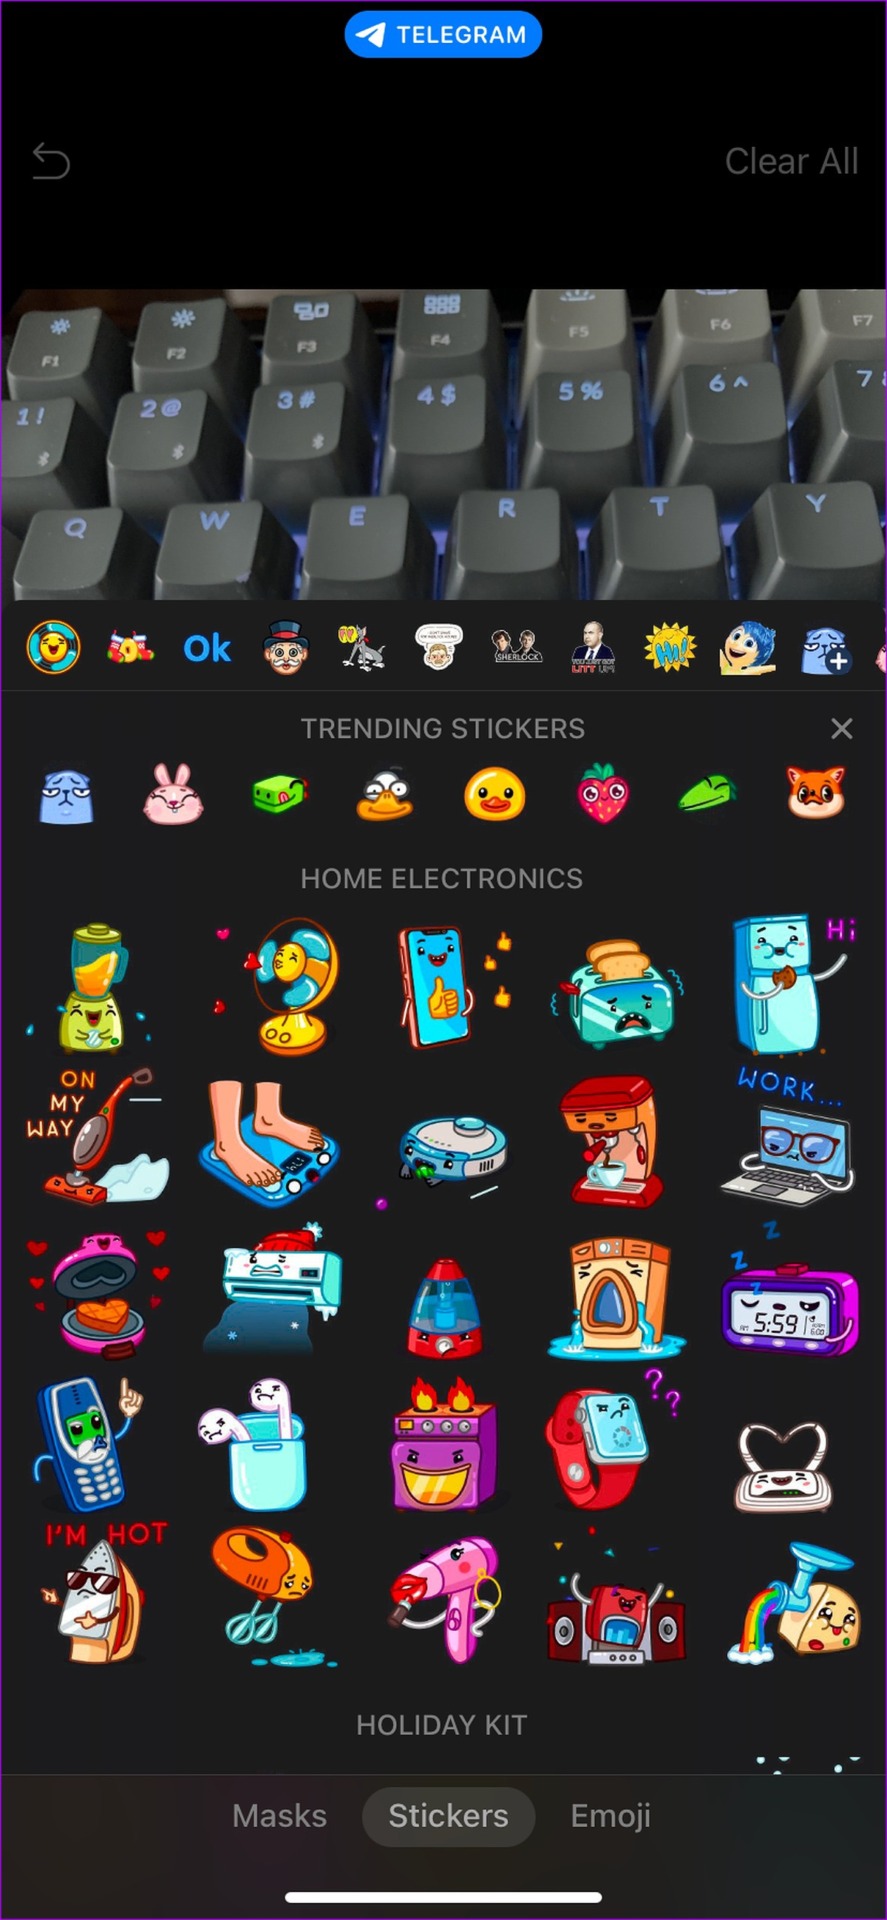 add stickers to telegram on iPhone